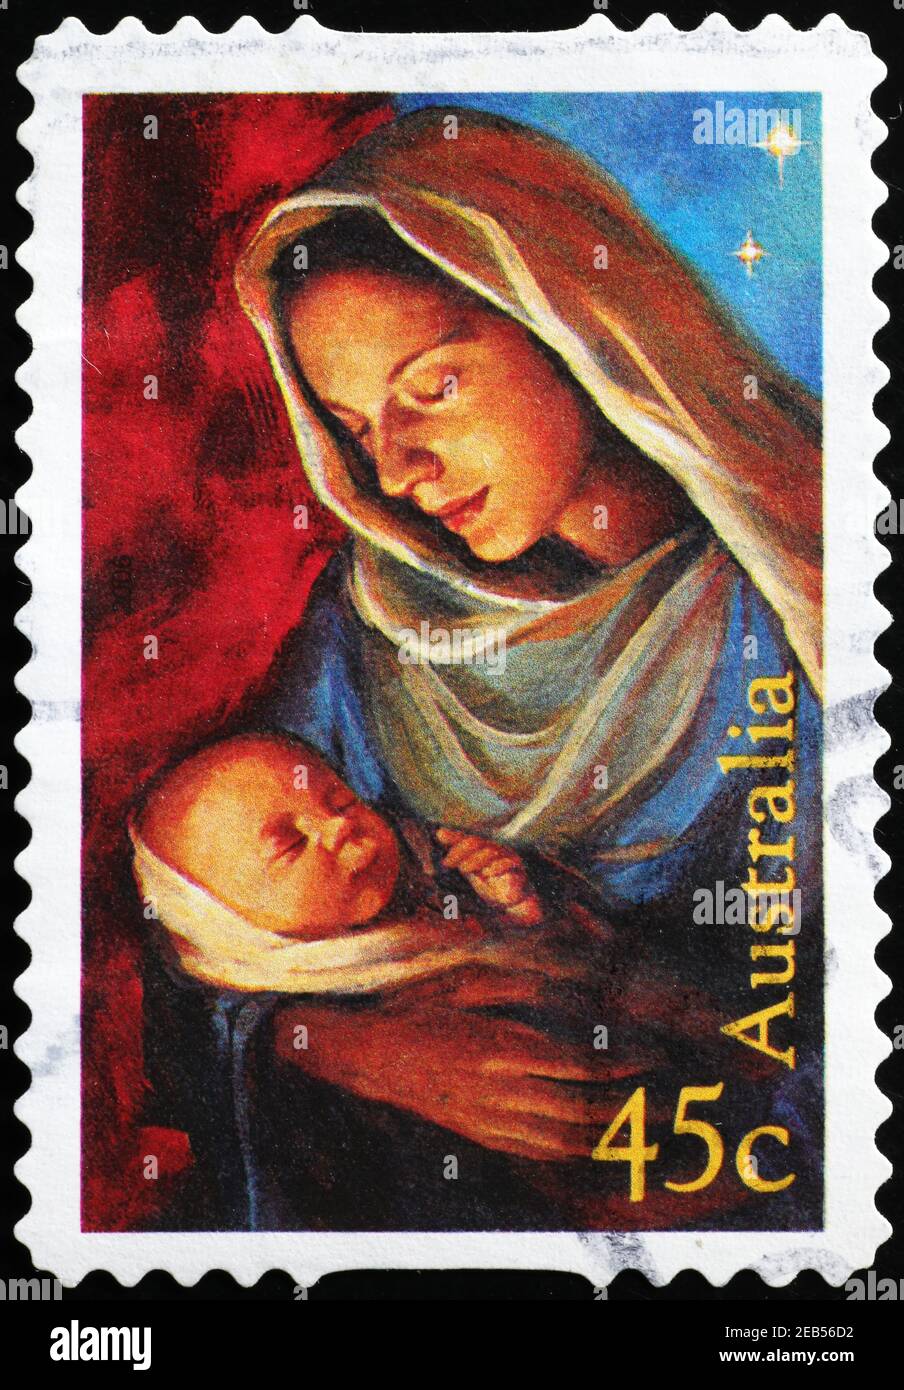 Madonna with baby on australian postage stamp Stock Photo